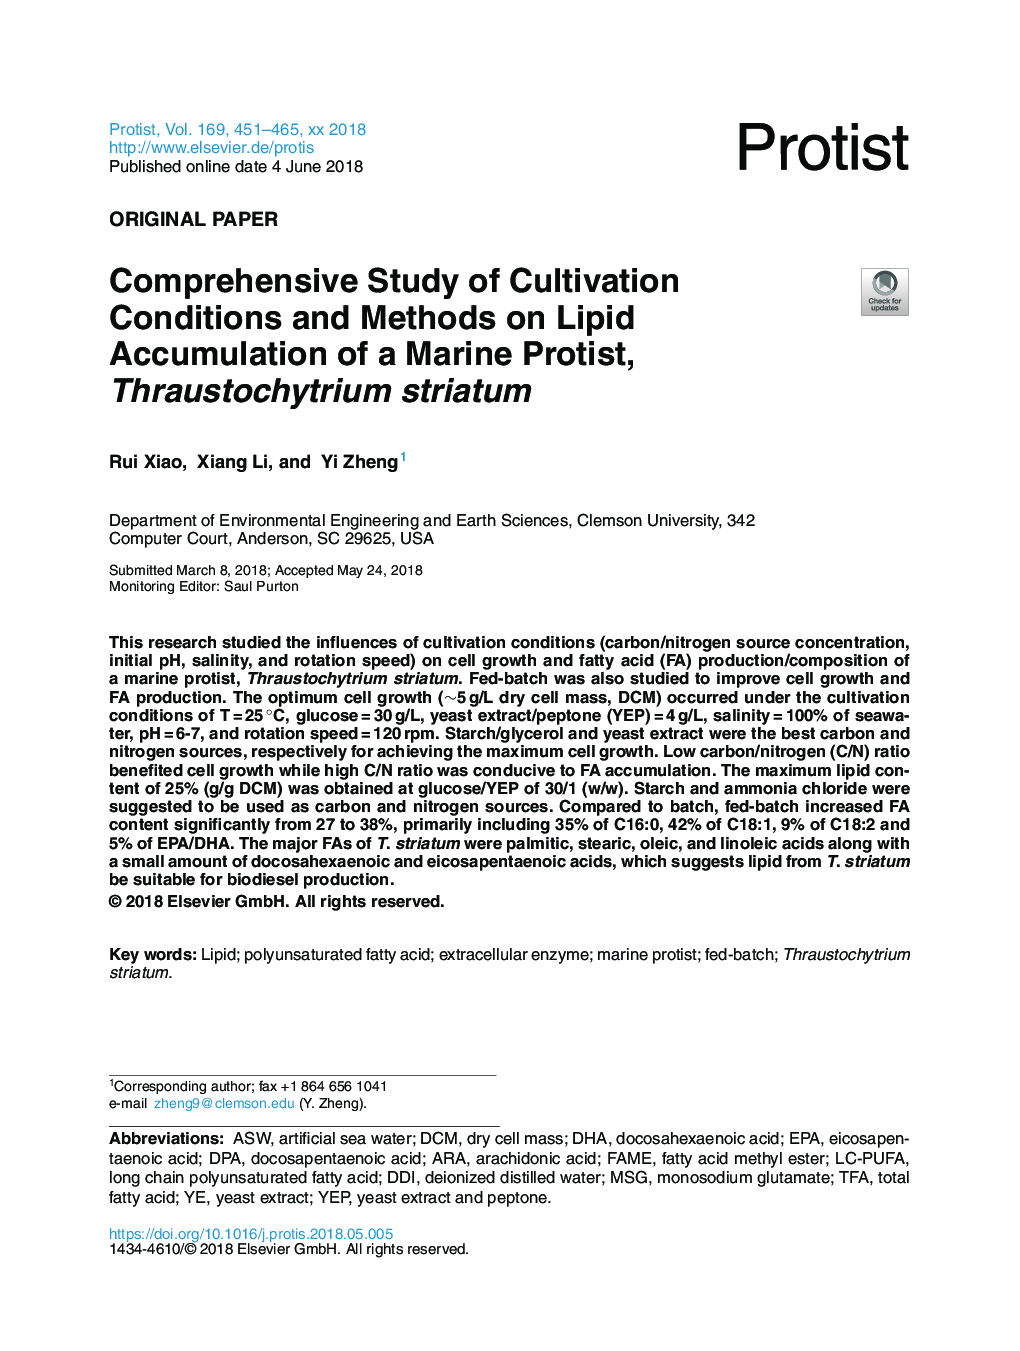 Comprehensive Study of Cultivation Conditions and Methods on Lipid Accumulation of a Marine Protist, Thraustochytrium striatum